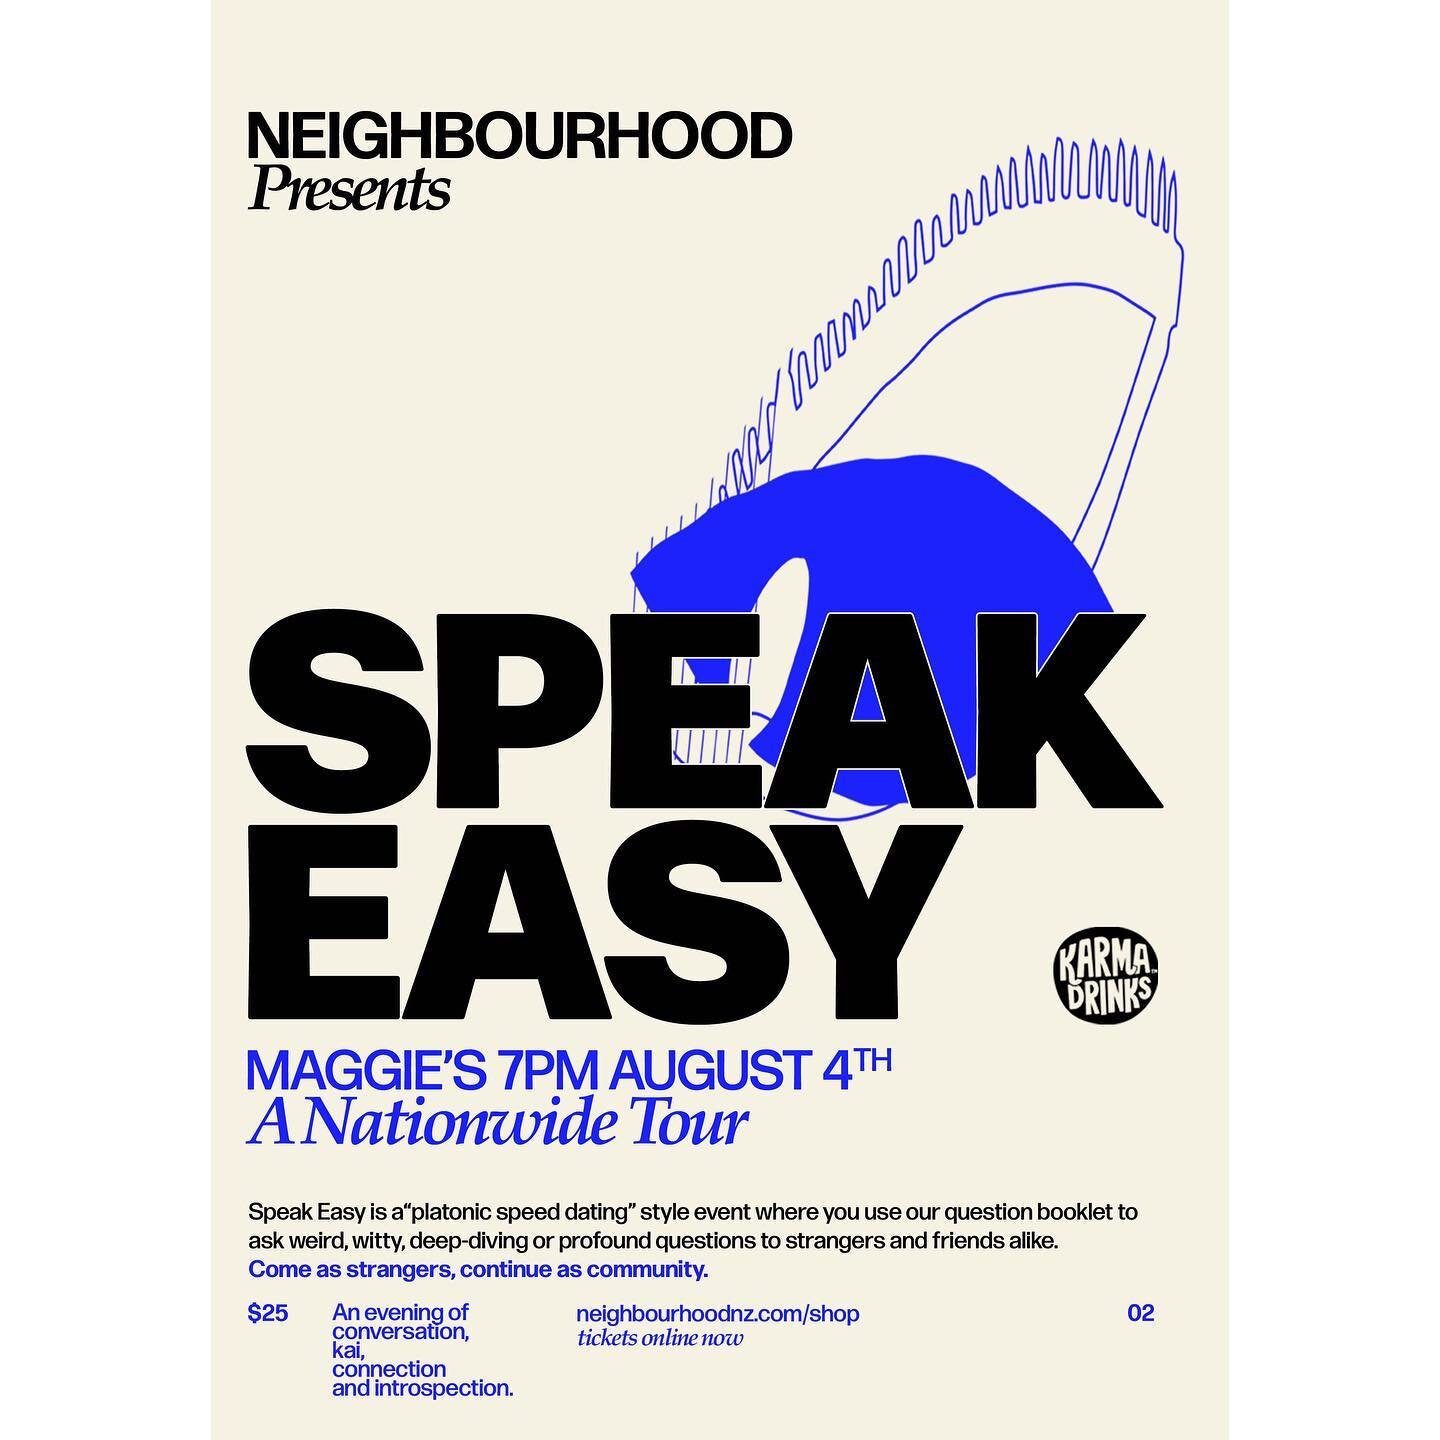 we are hosting the lovely folks from @neighbourhoodnz this week for their national series Speak Easy. 

Speak Easy is a platonic speed friending event where all are invited to come and share in an evening of conversation, connection, kai, @karmadrink